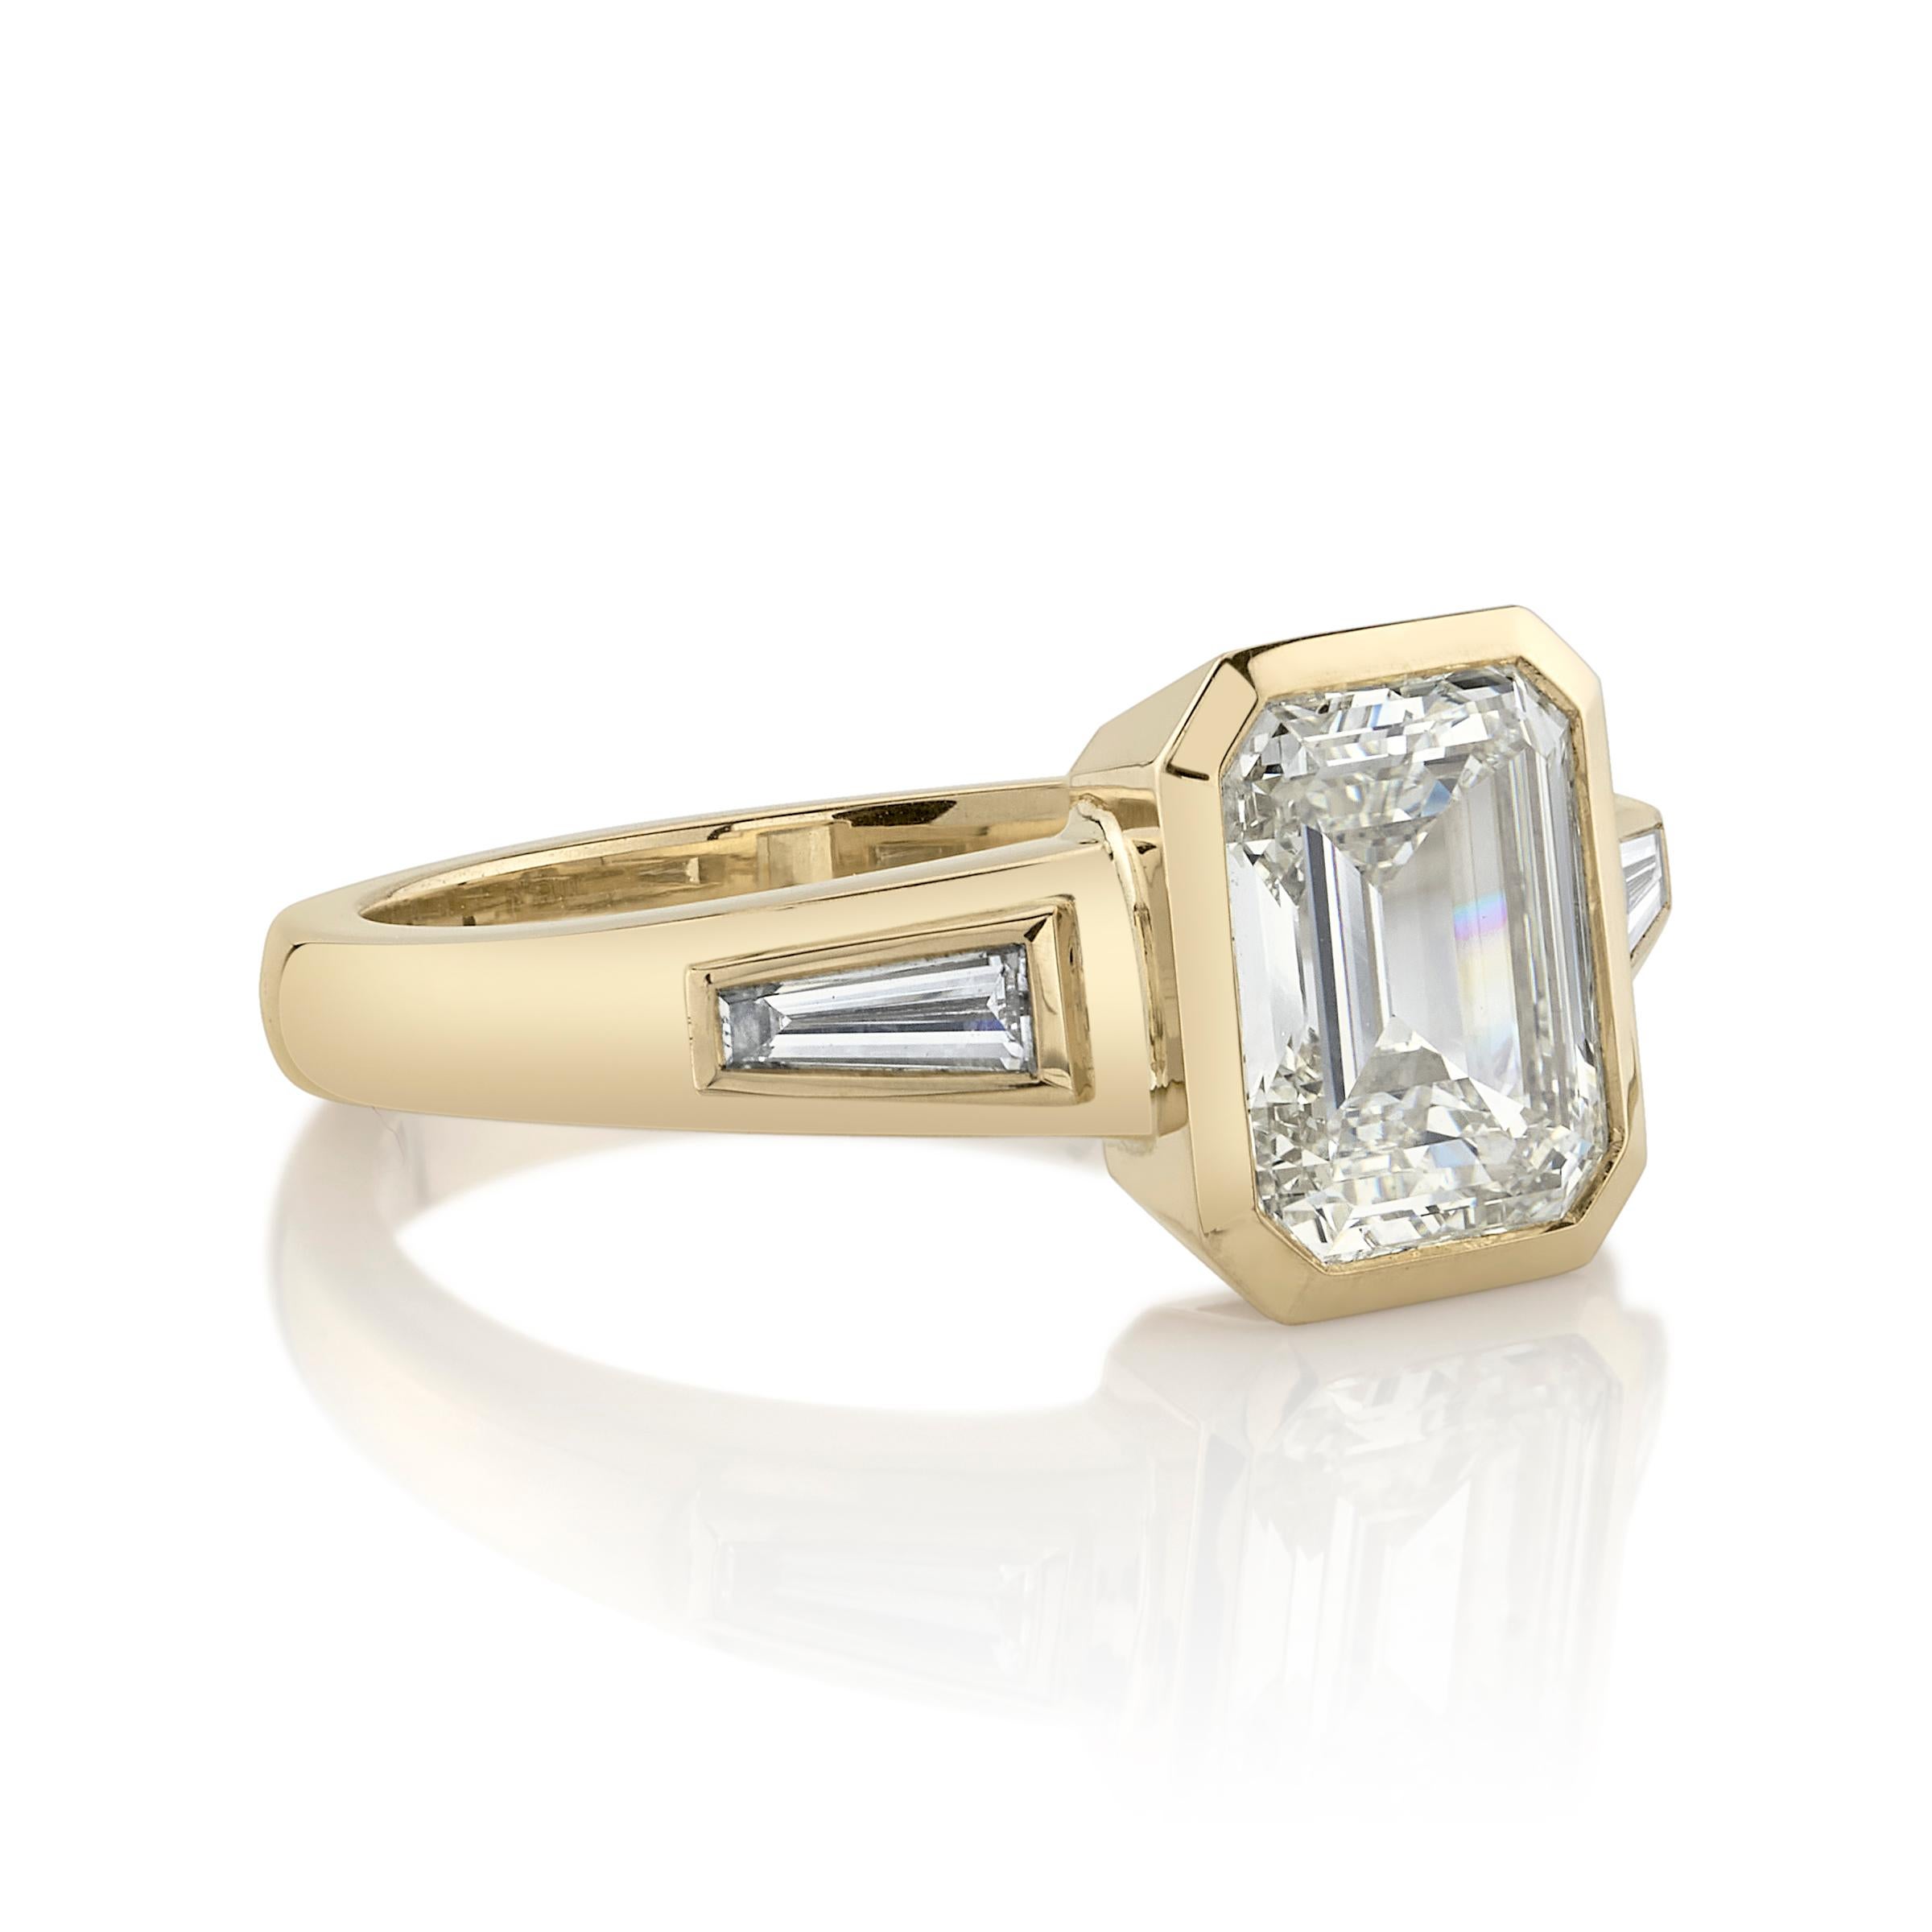 2.00ct N/VS2 GIA certified emerald cut diamond with 0.24ctw tapered baguette cut accent diamonds set in a handcrafted 18K yellow gold mounting.
